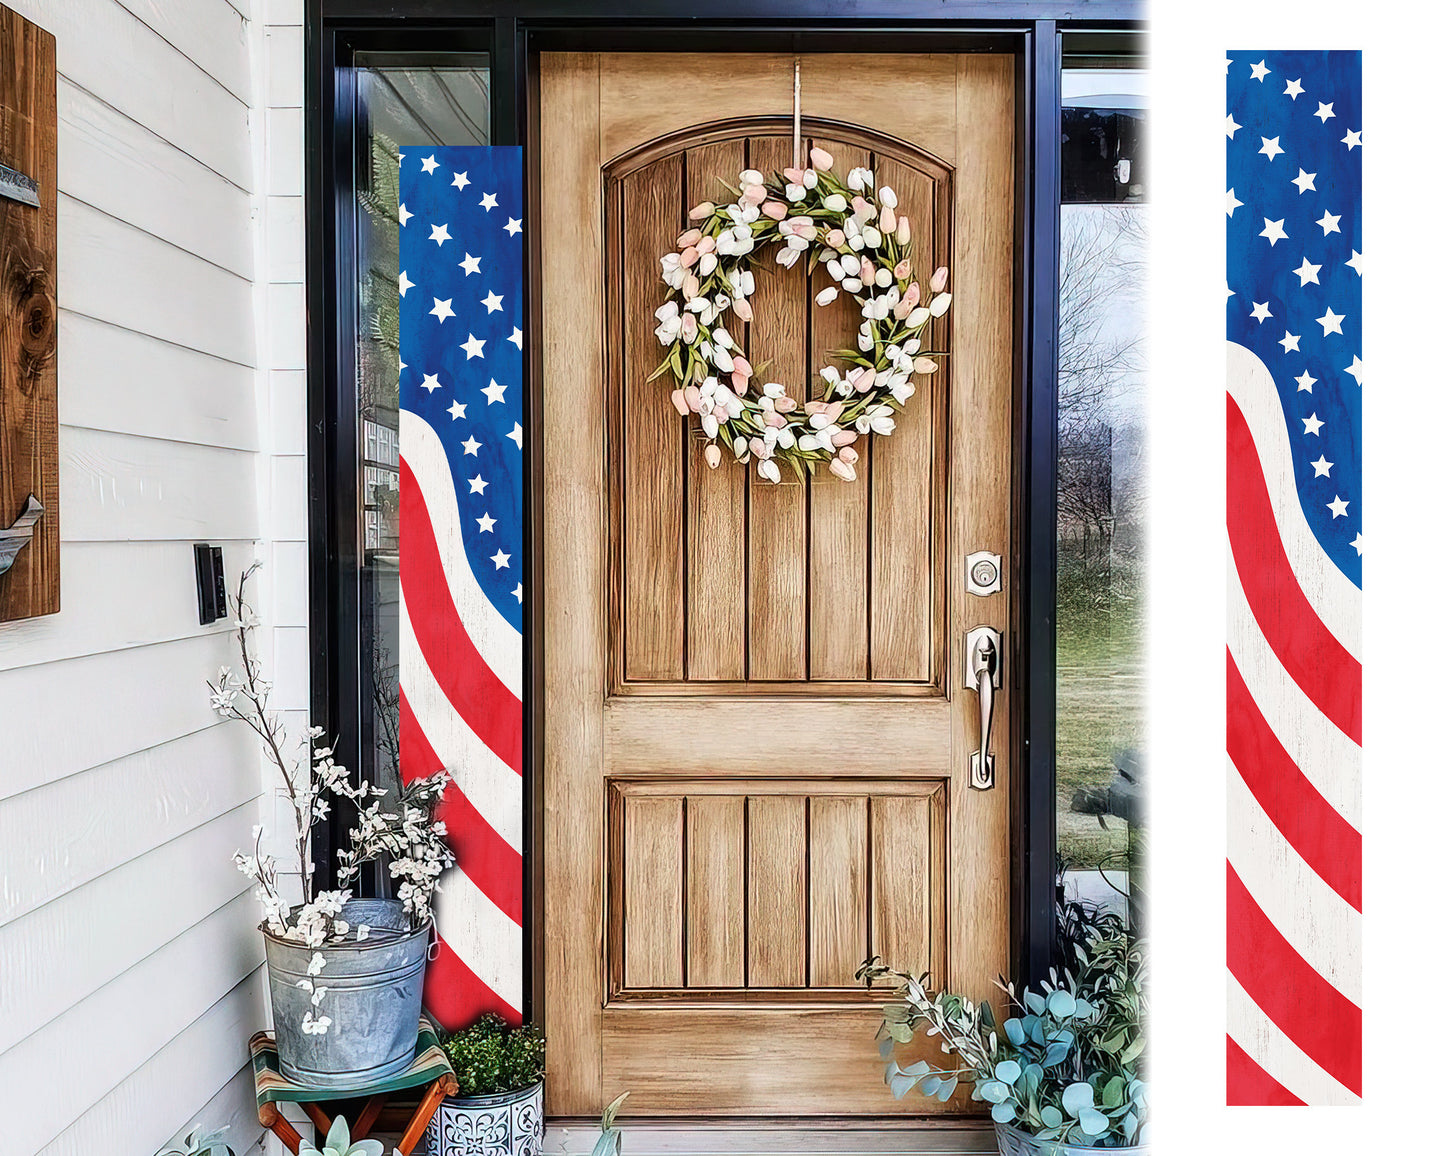 72in 4th of July  Wooden Porch Sign - Patriotic Decor to Celebrate Independence Day with Style